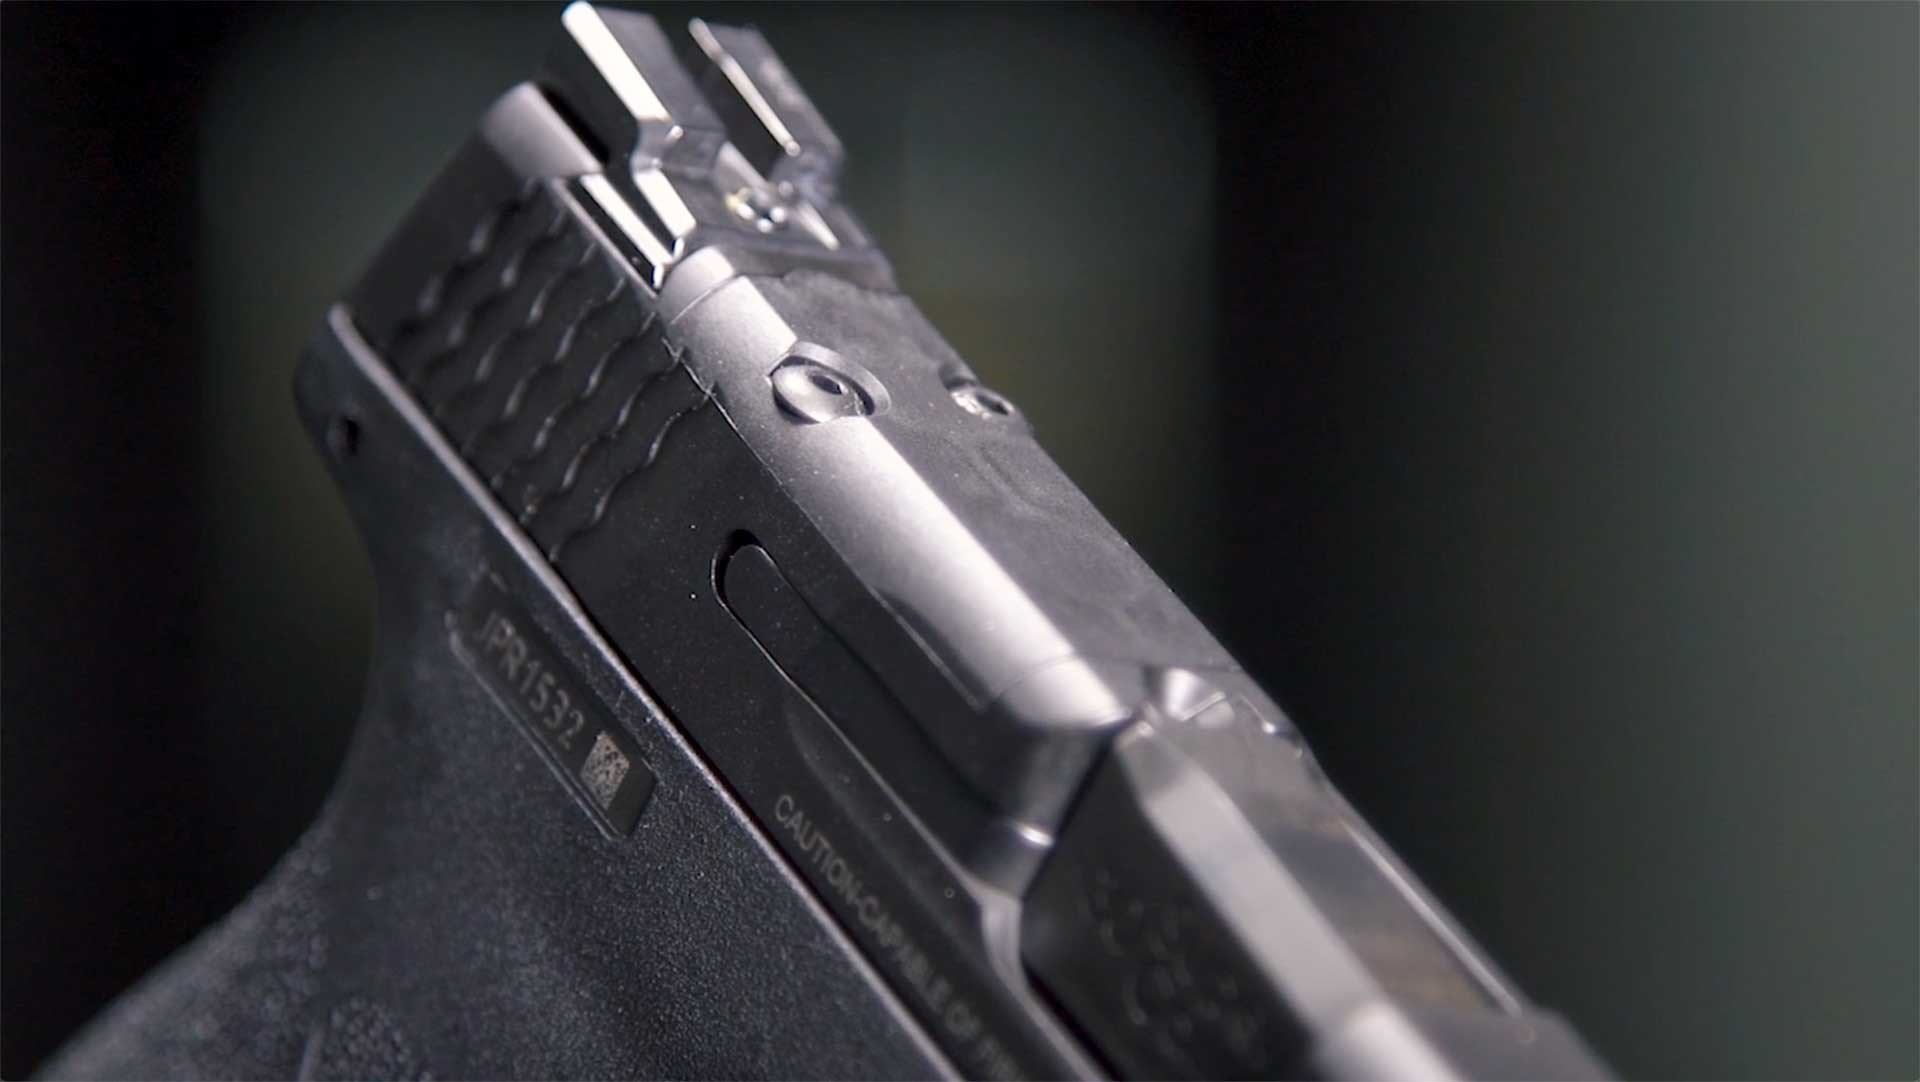 Milled slide shown on top of a Smith & Wesson M&P Shield Plus handgun.